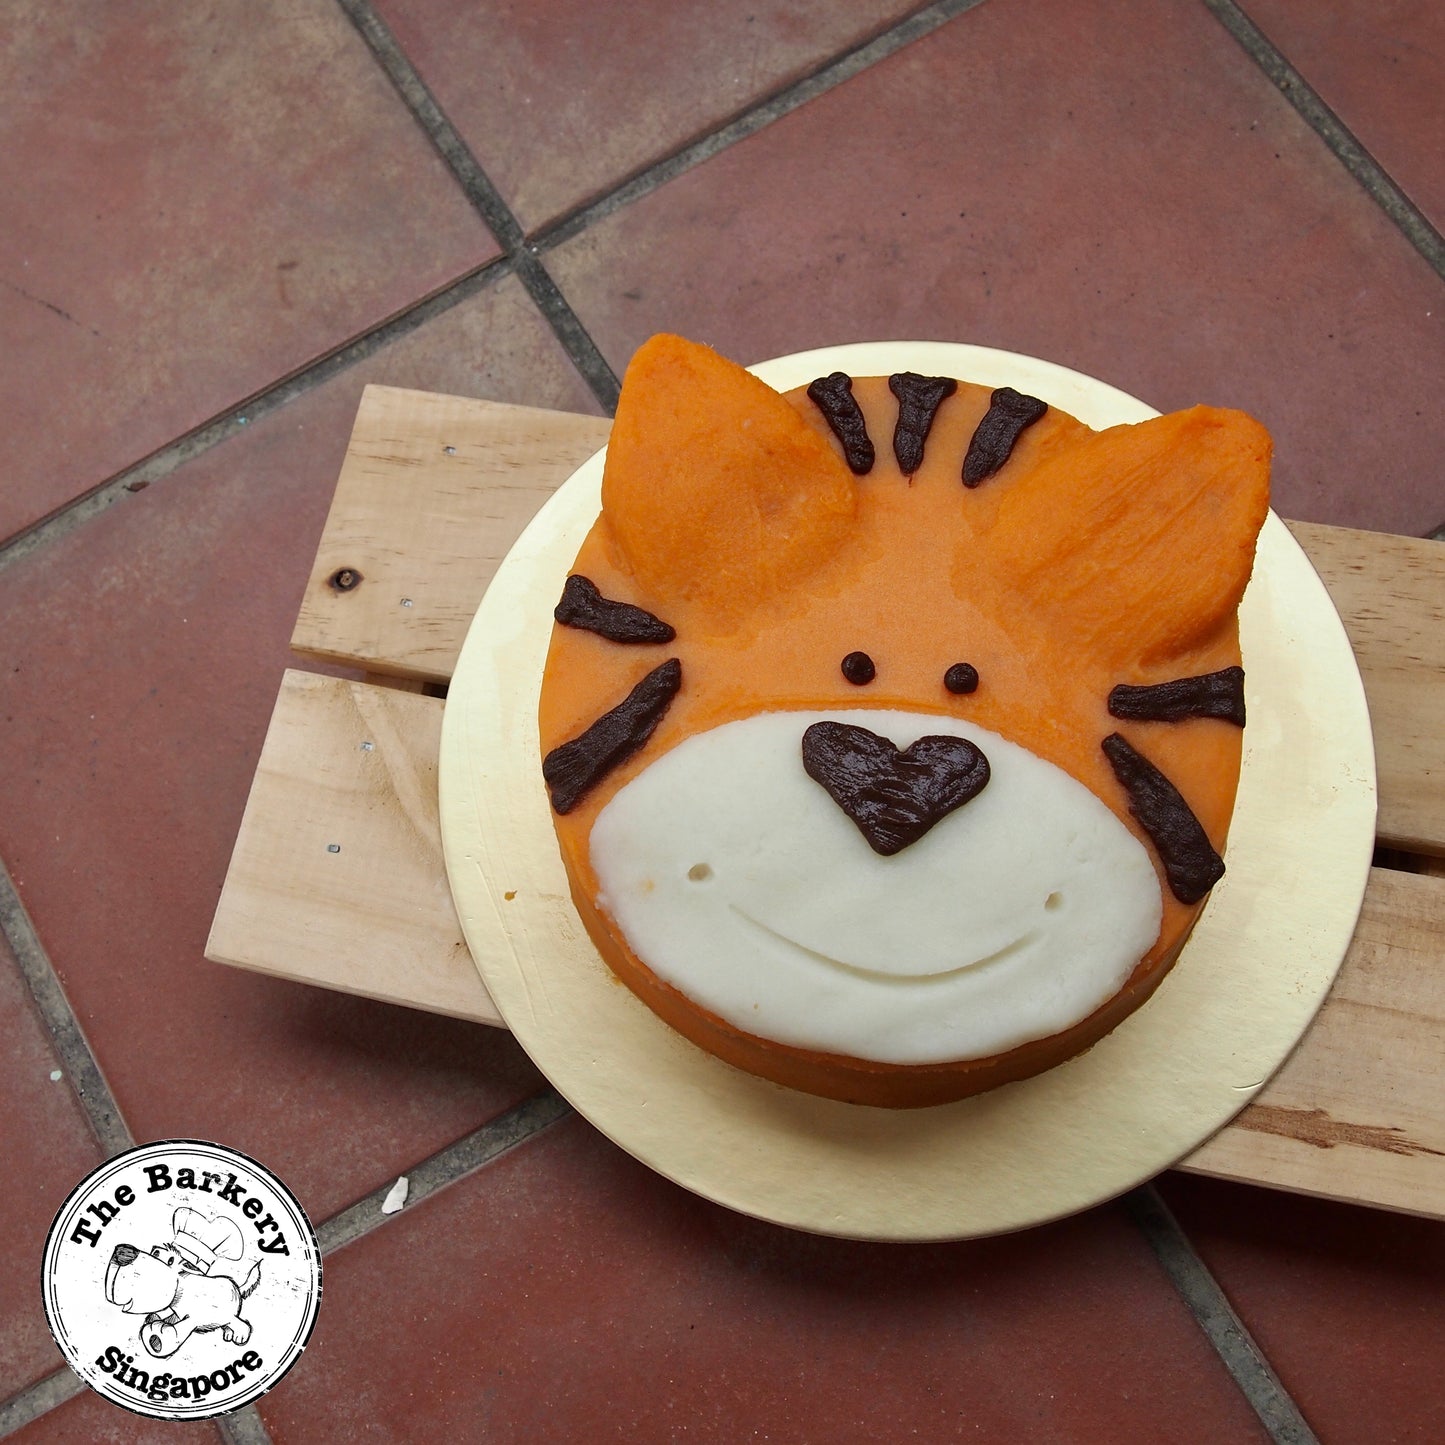 The Barkery's Tiger Cake